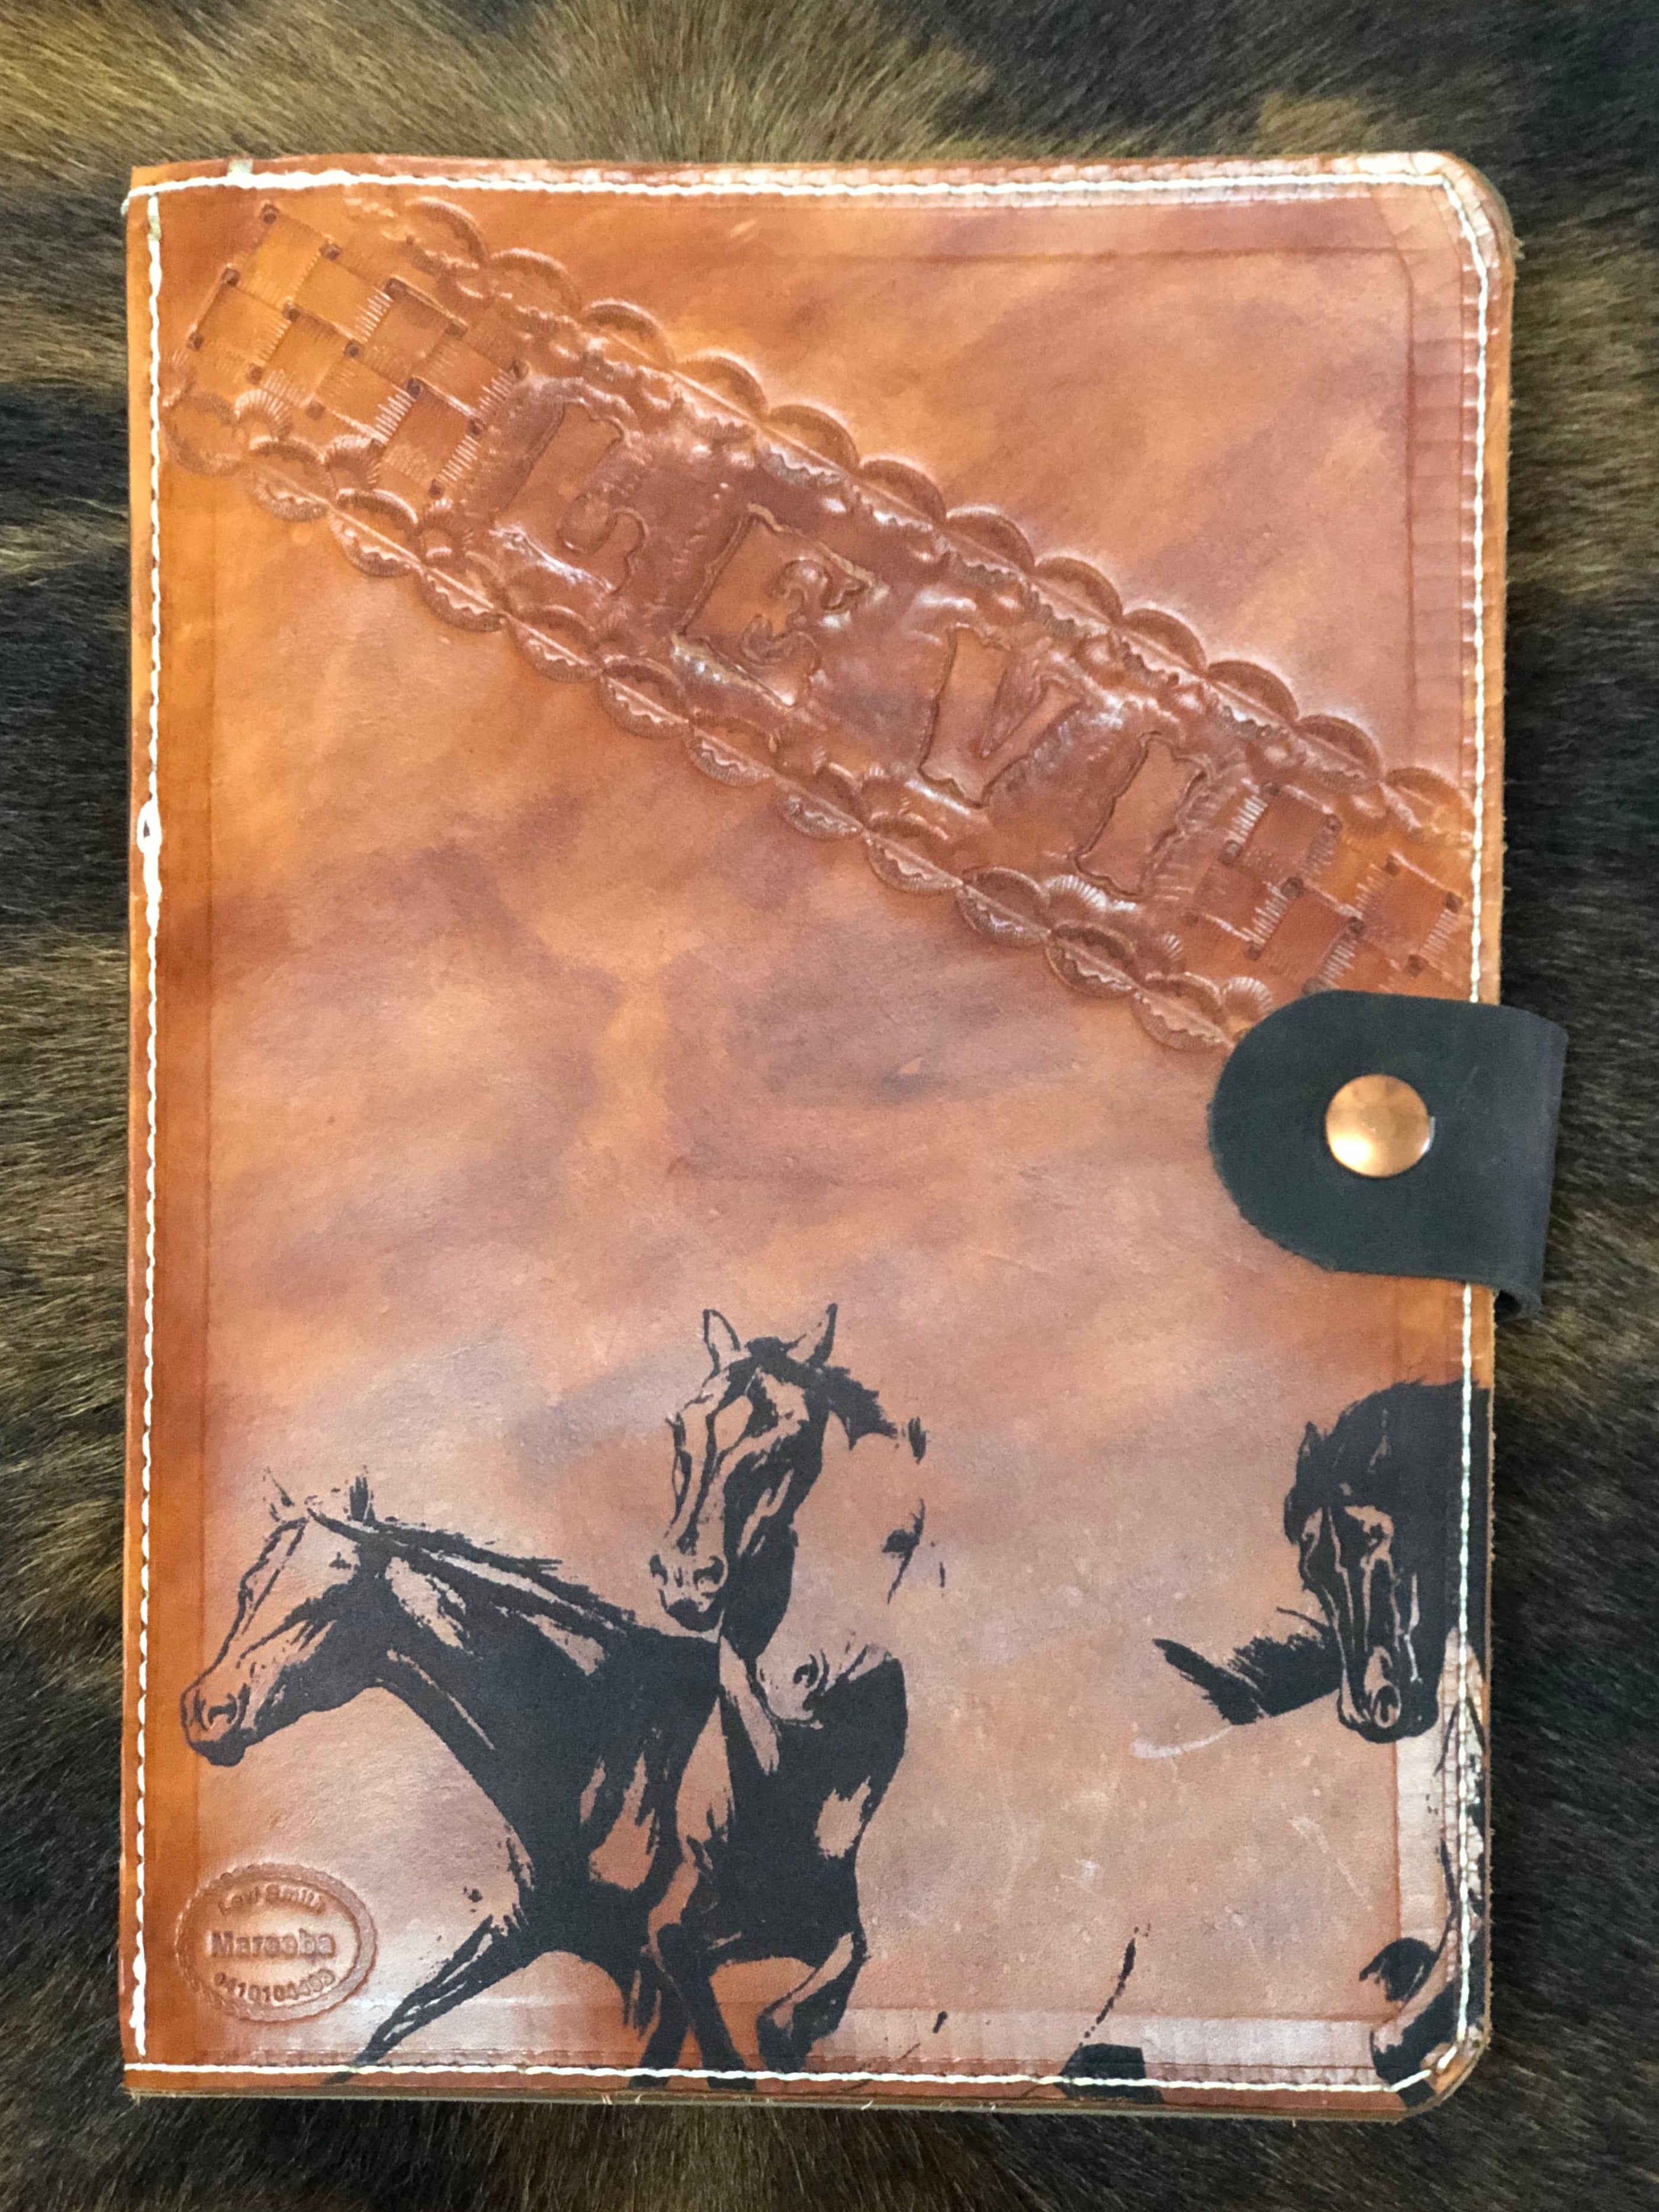 Leather Diary Covers